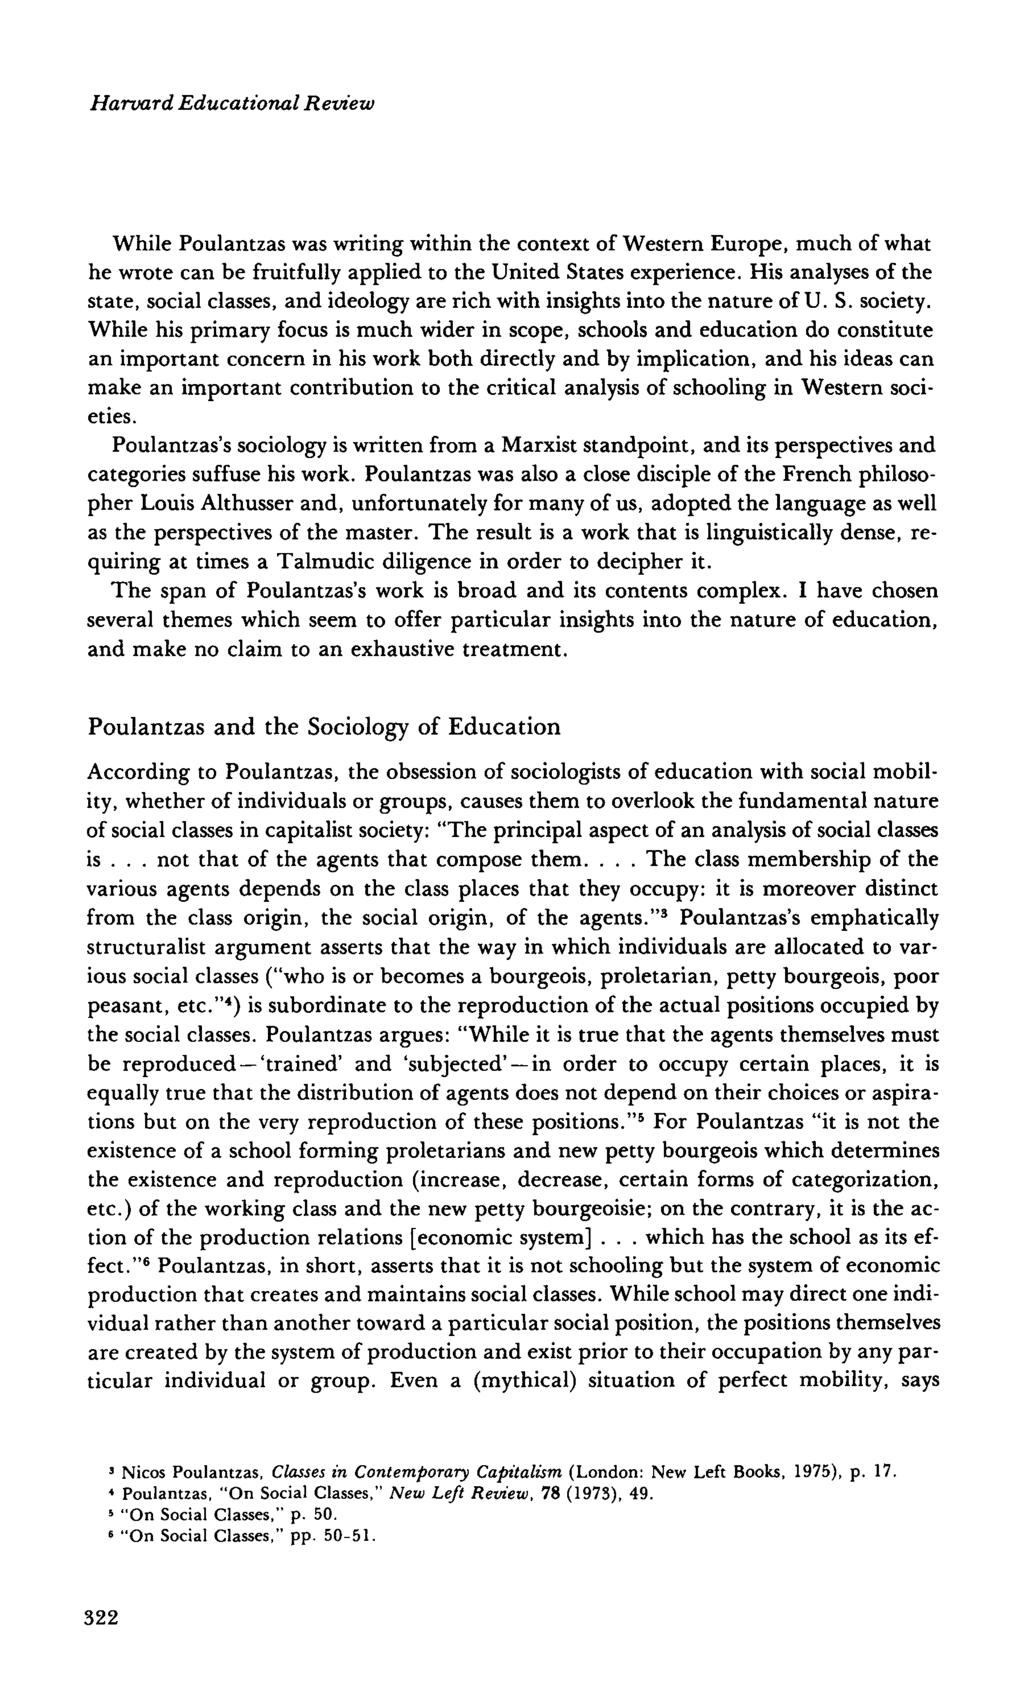 Harvard Educational Review While Poulantzas was writing within the context of Western Europe, much of what he wrote can be fruitfully applied to the United States experience.